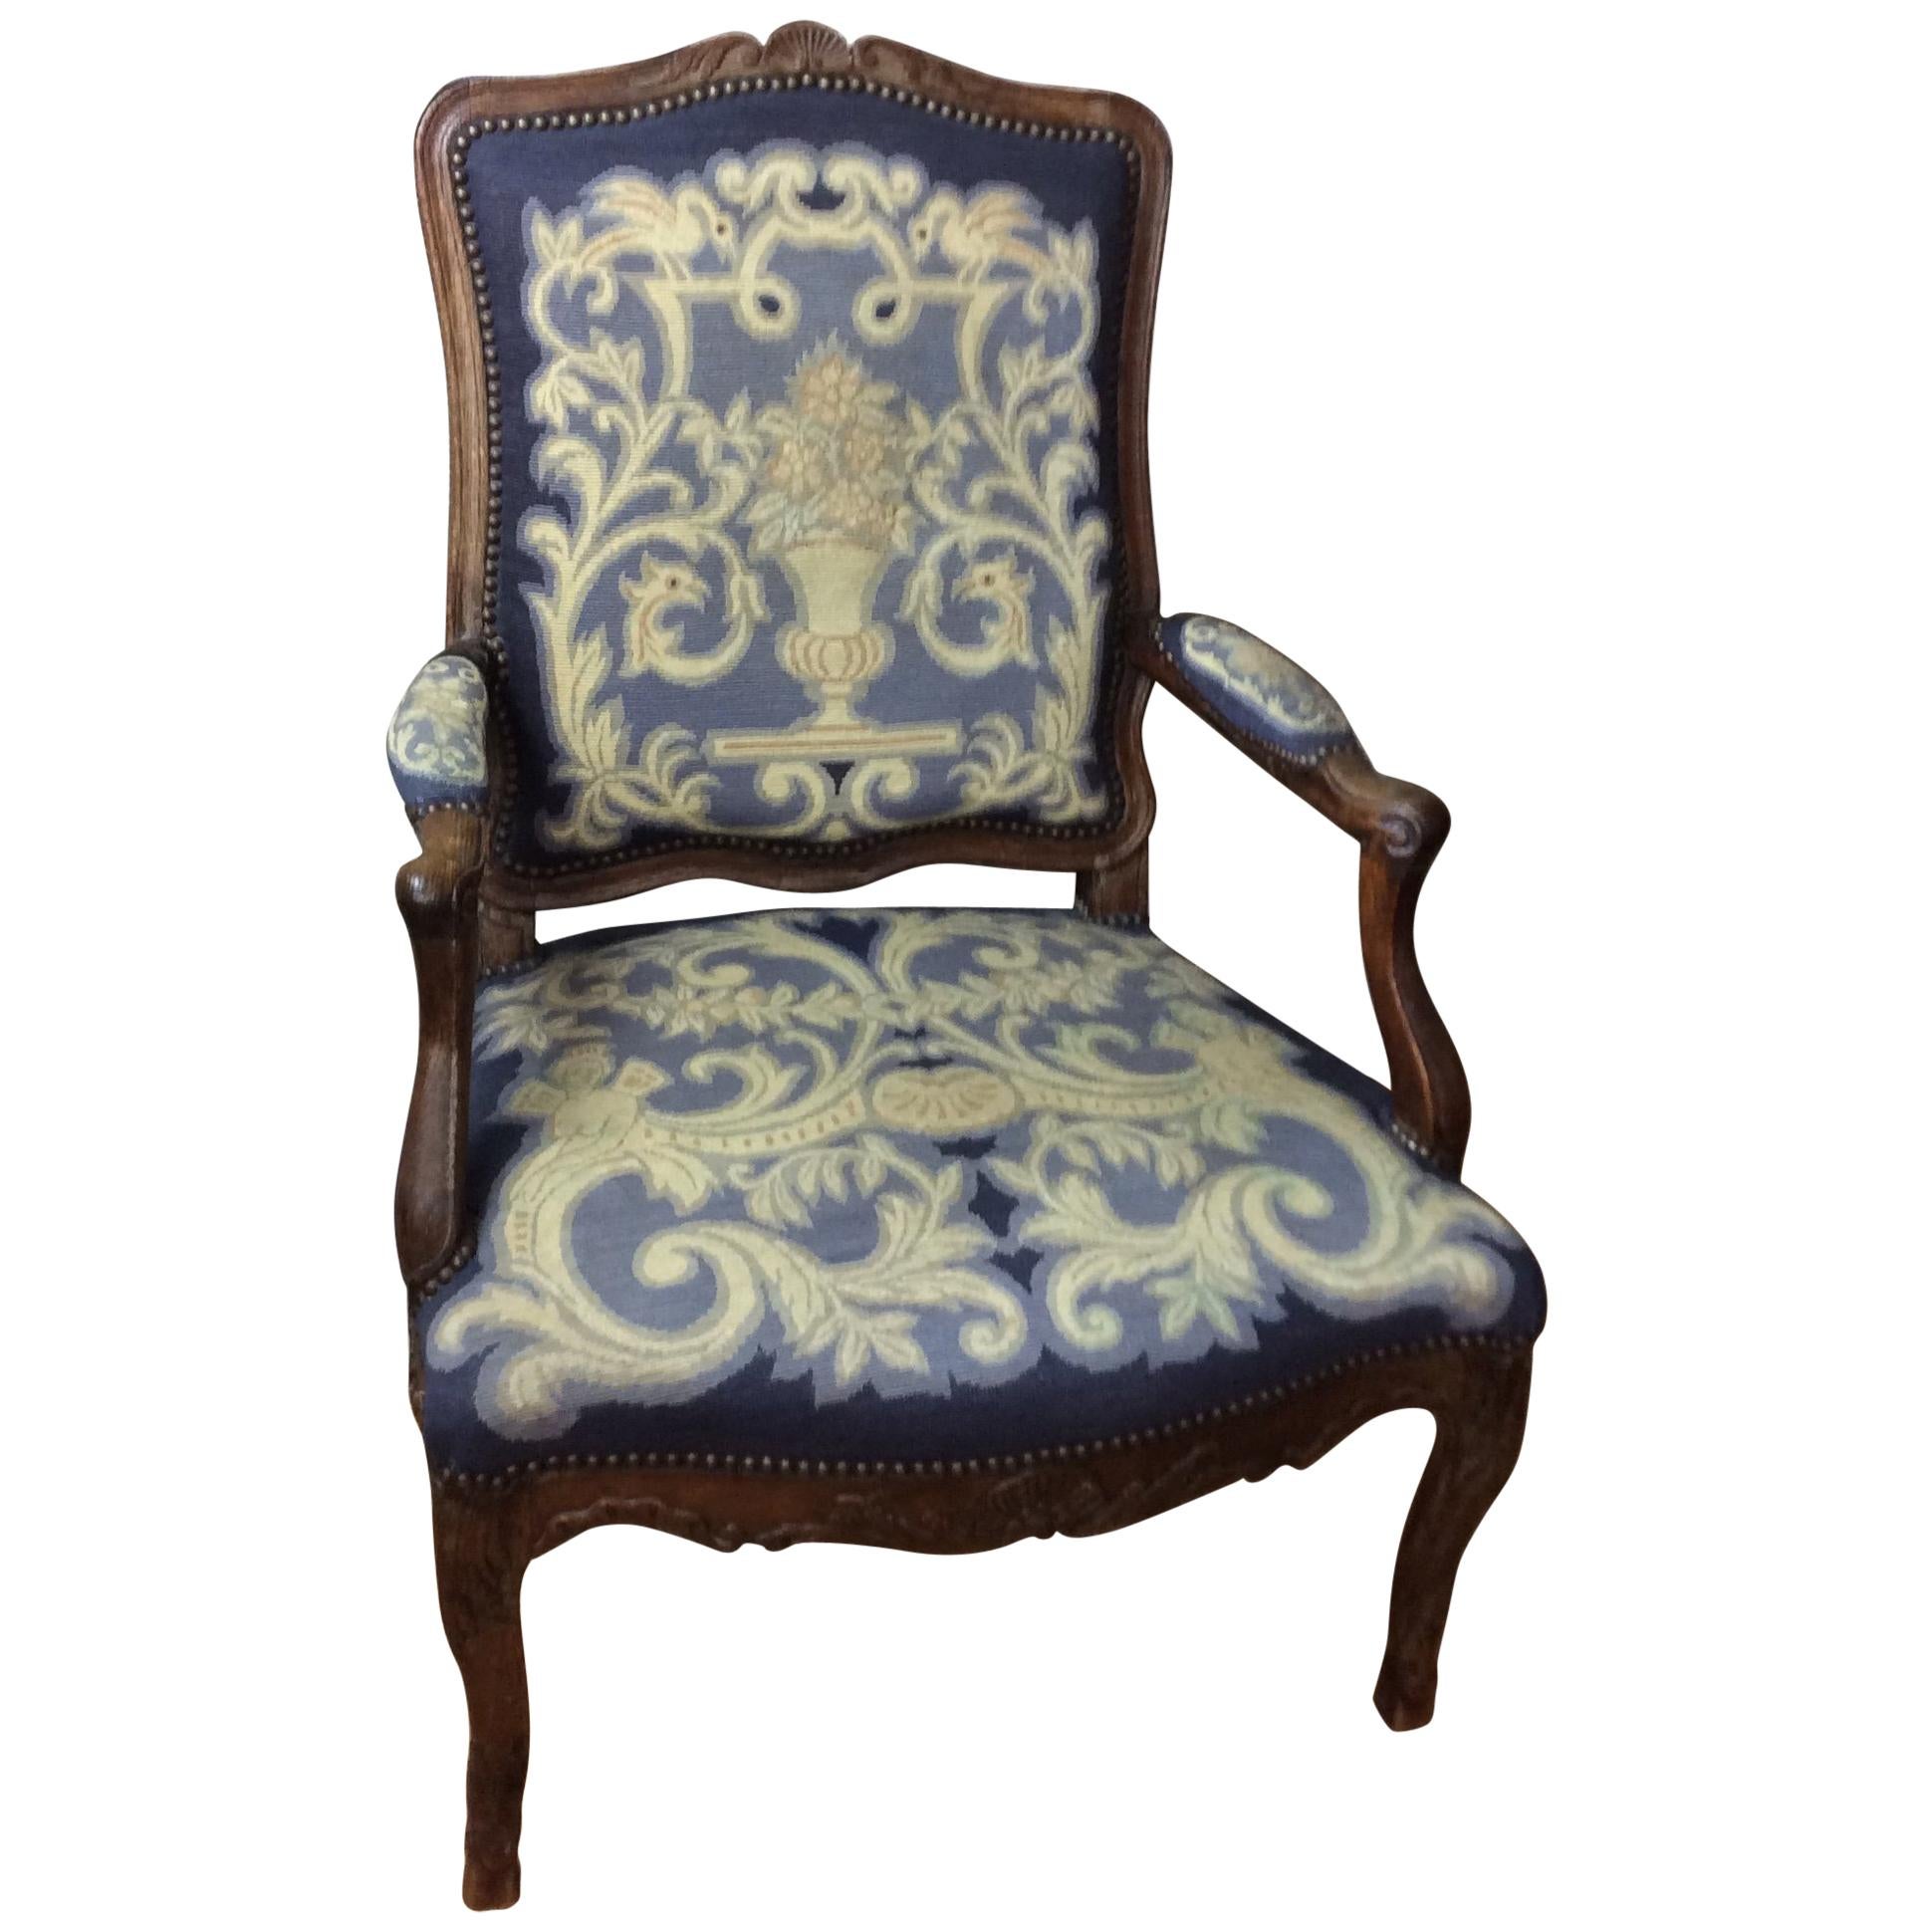 Early 18th Century French Régence Carved Armchair